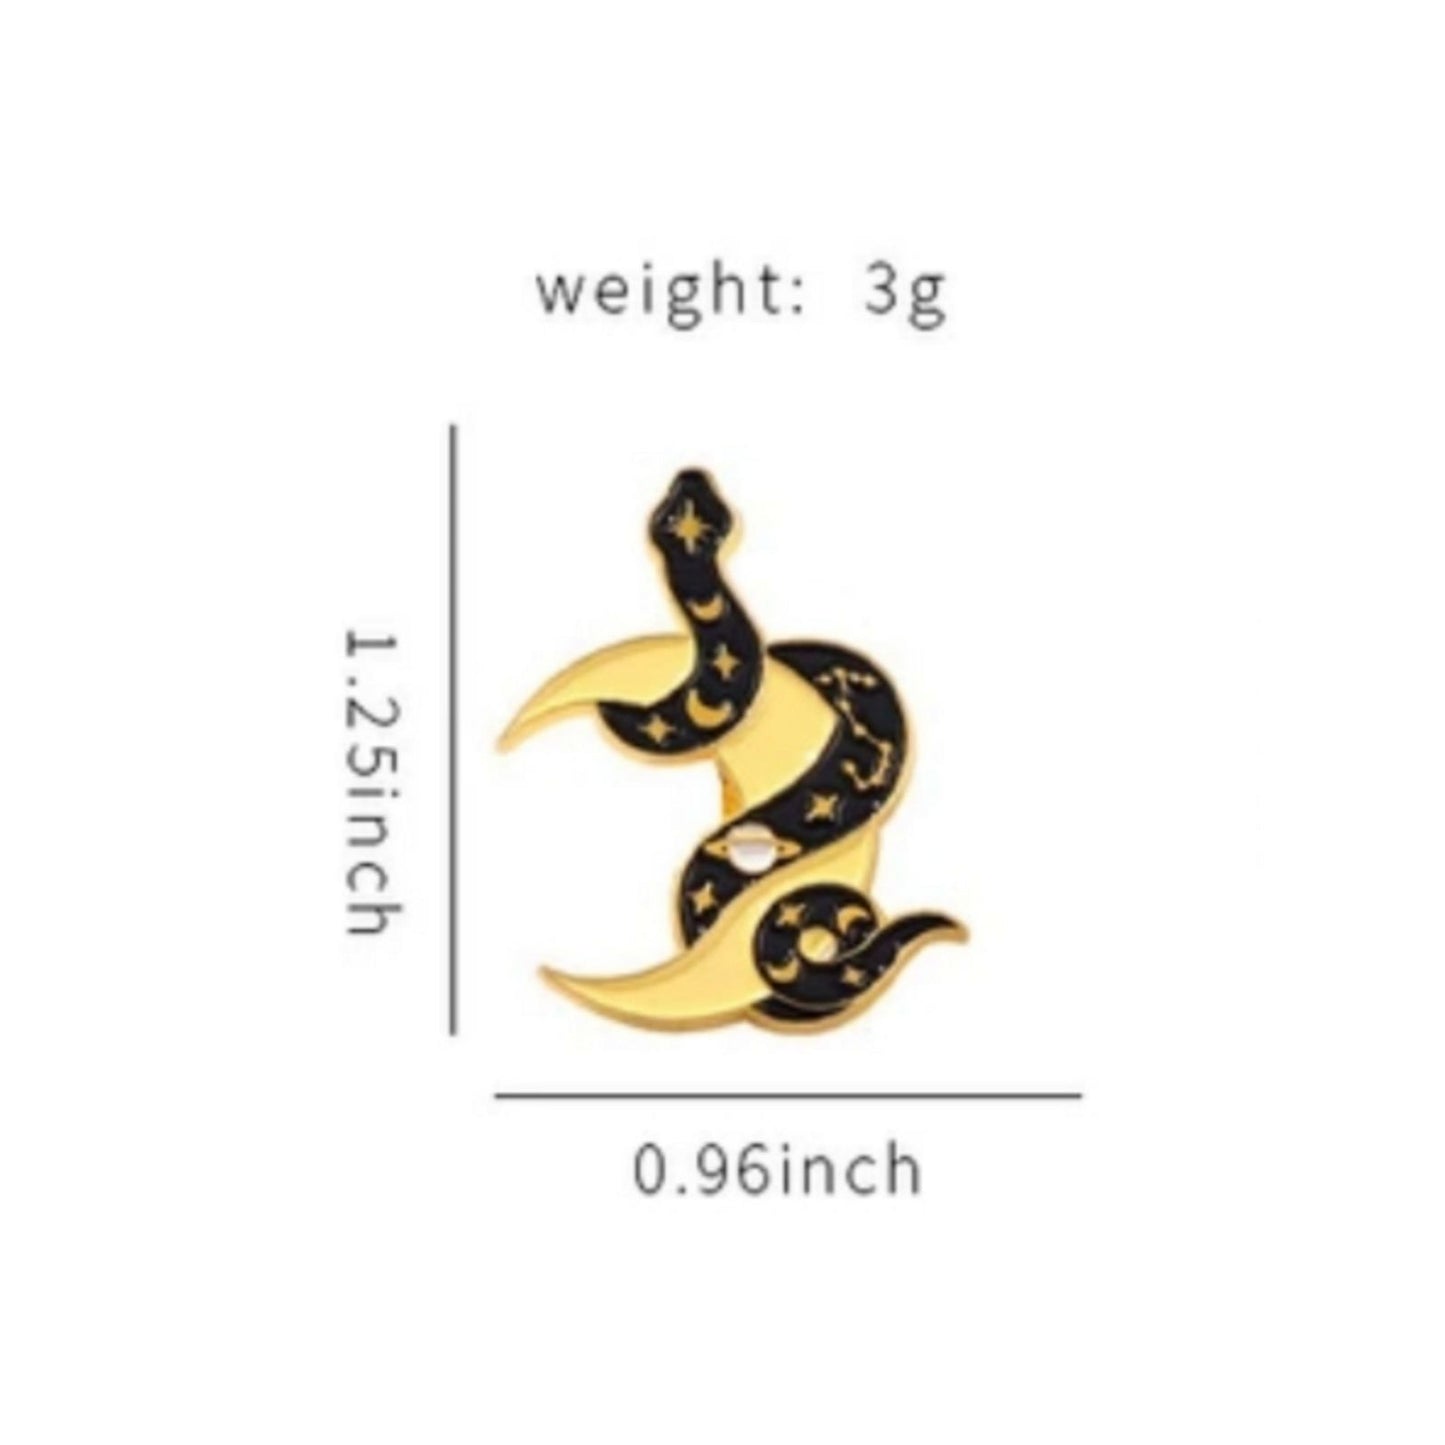 Black Space Snake with Moon Enamel Pin - D SCENT 